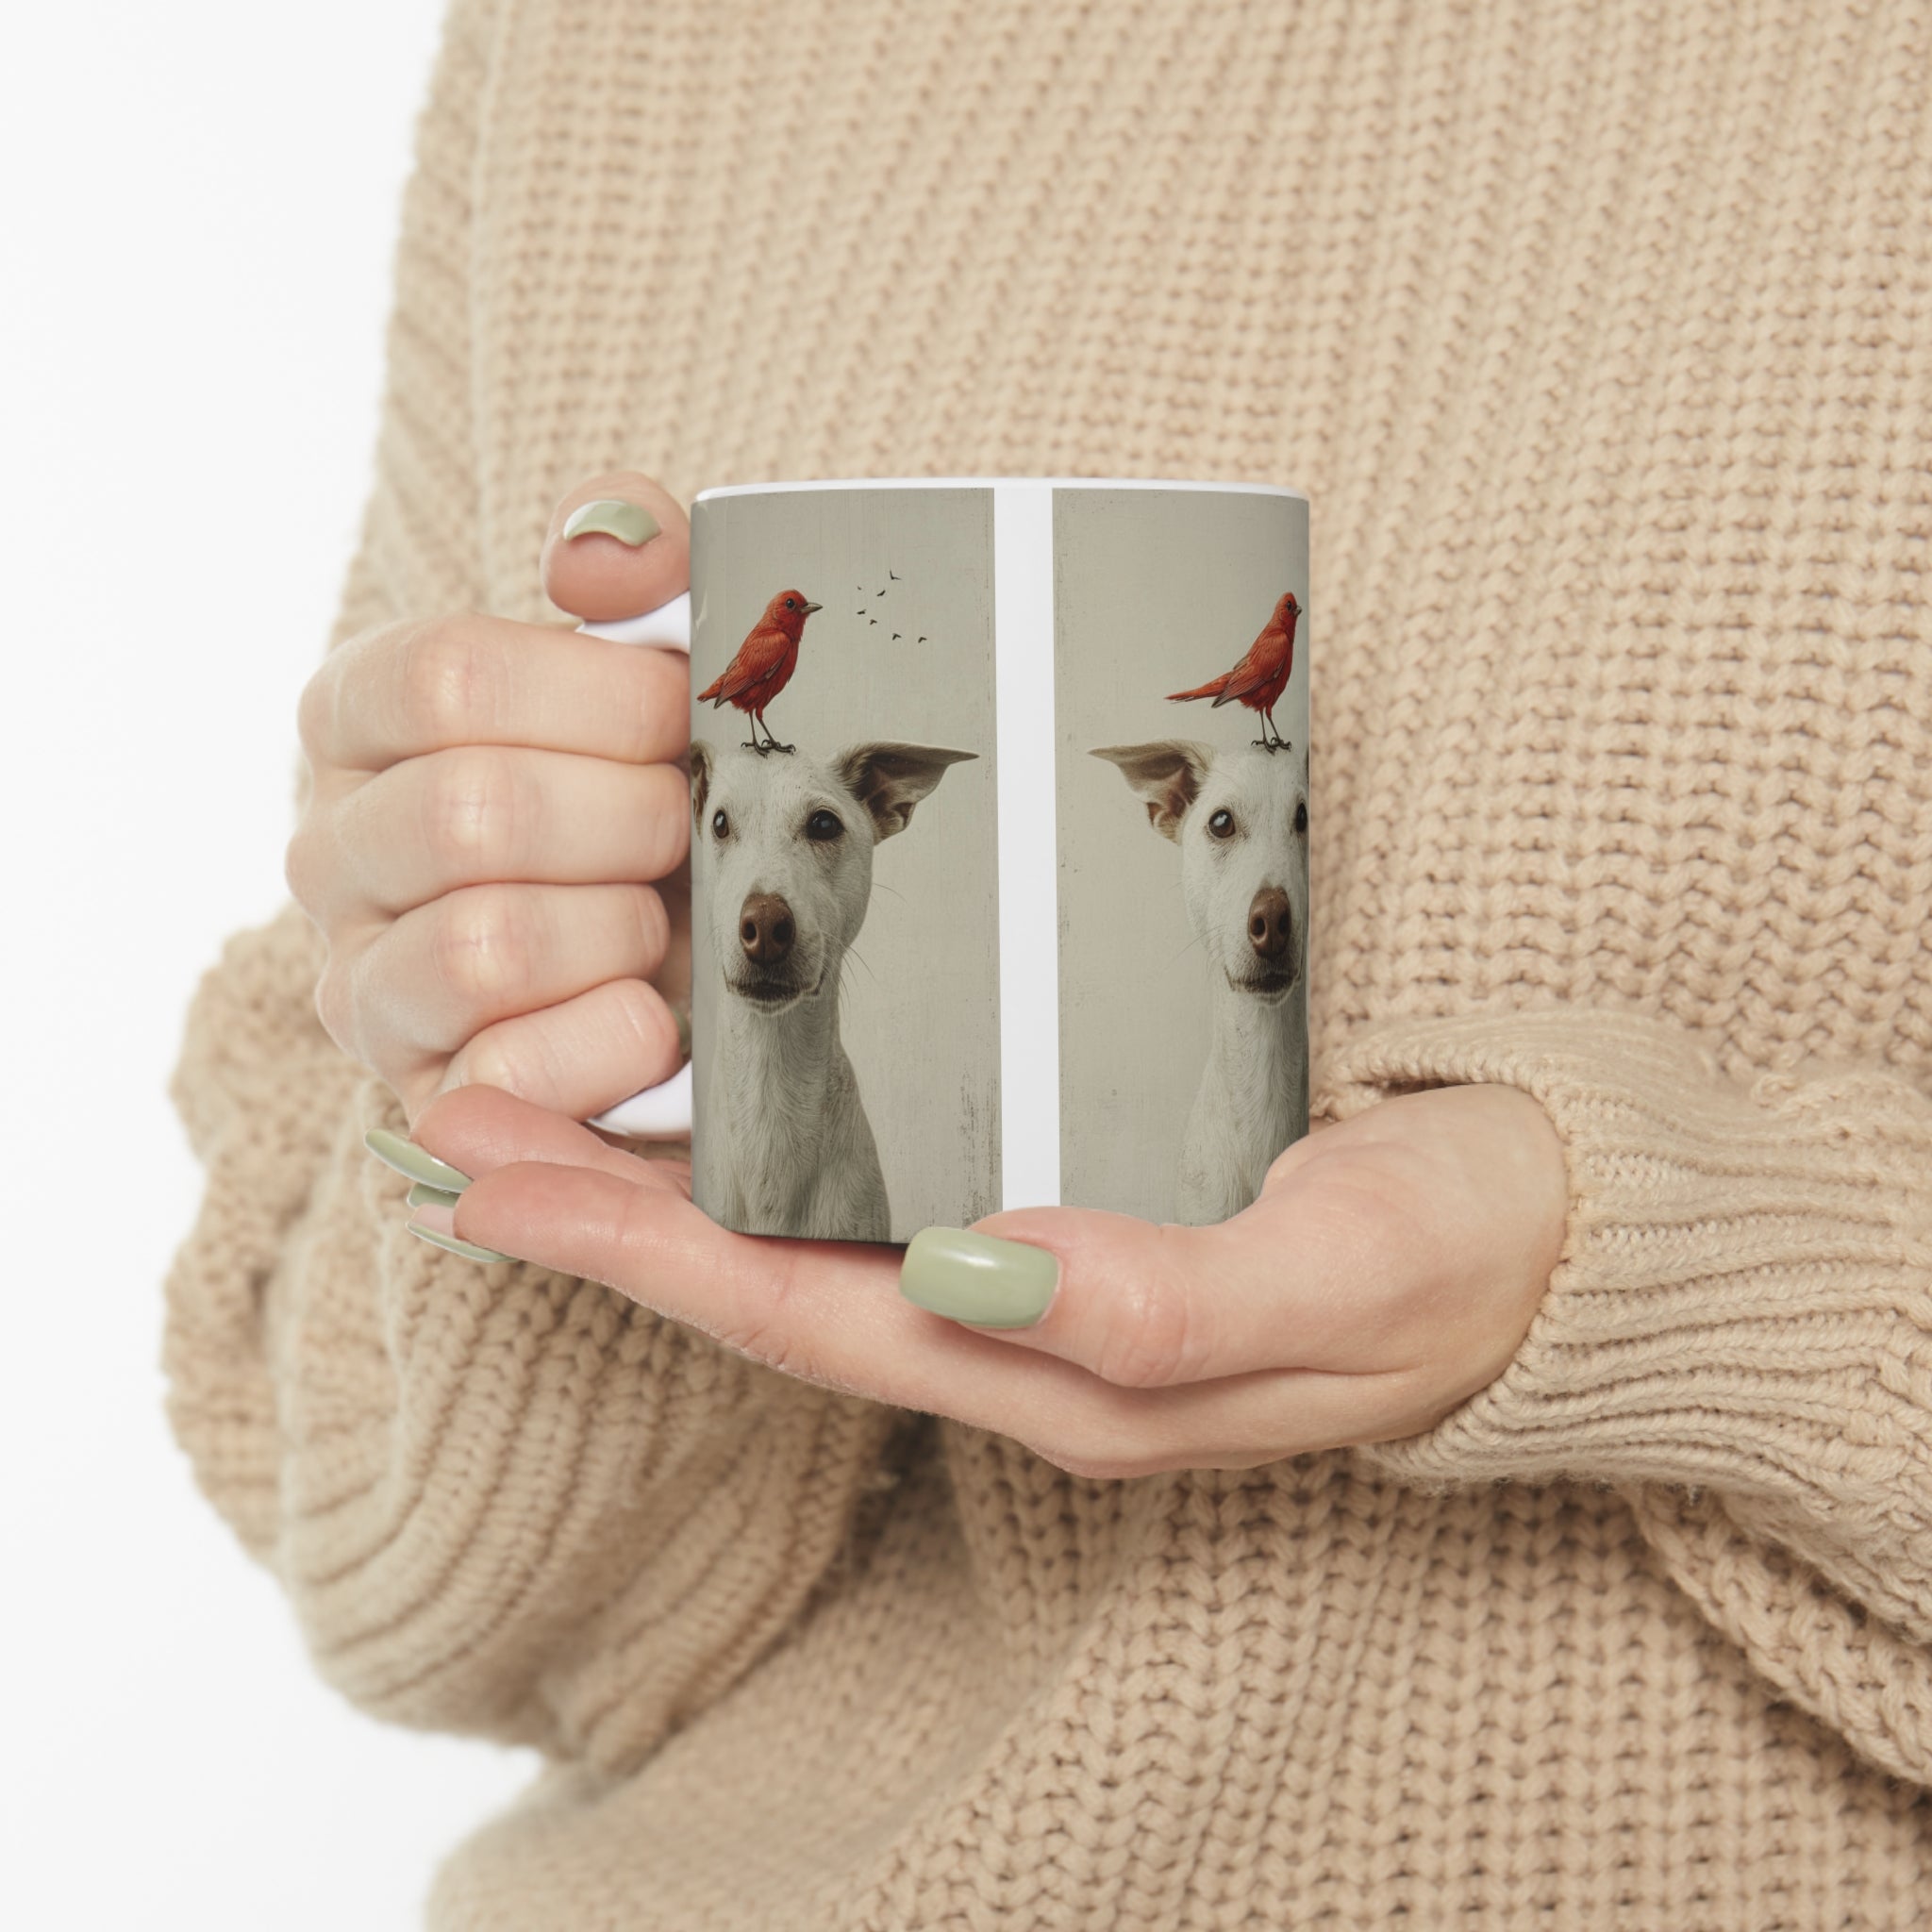 Happy Dog with Friendly Birddie Ceramic Mug 11oz - Adorable Animal Friendship Coffee Cup for Relaxing Mornings and Tea Time Bliss